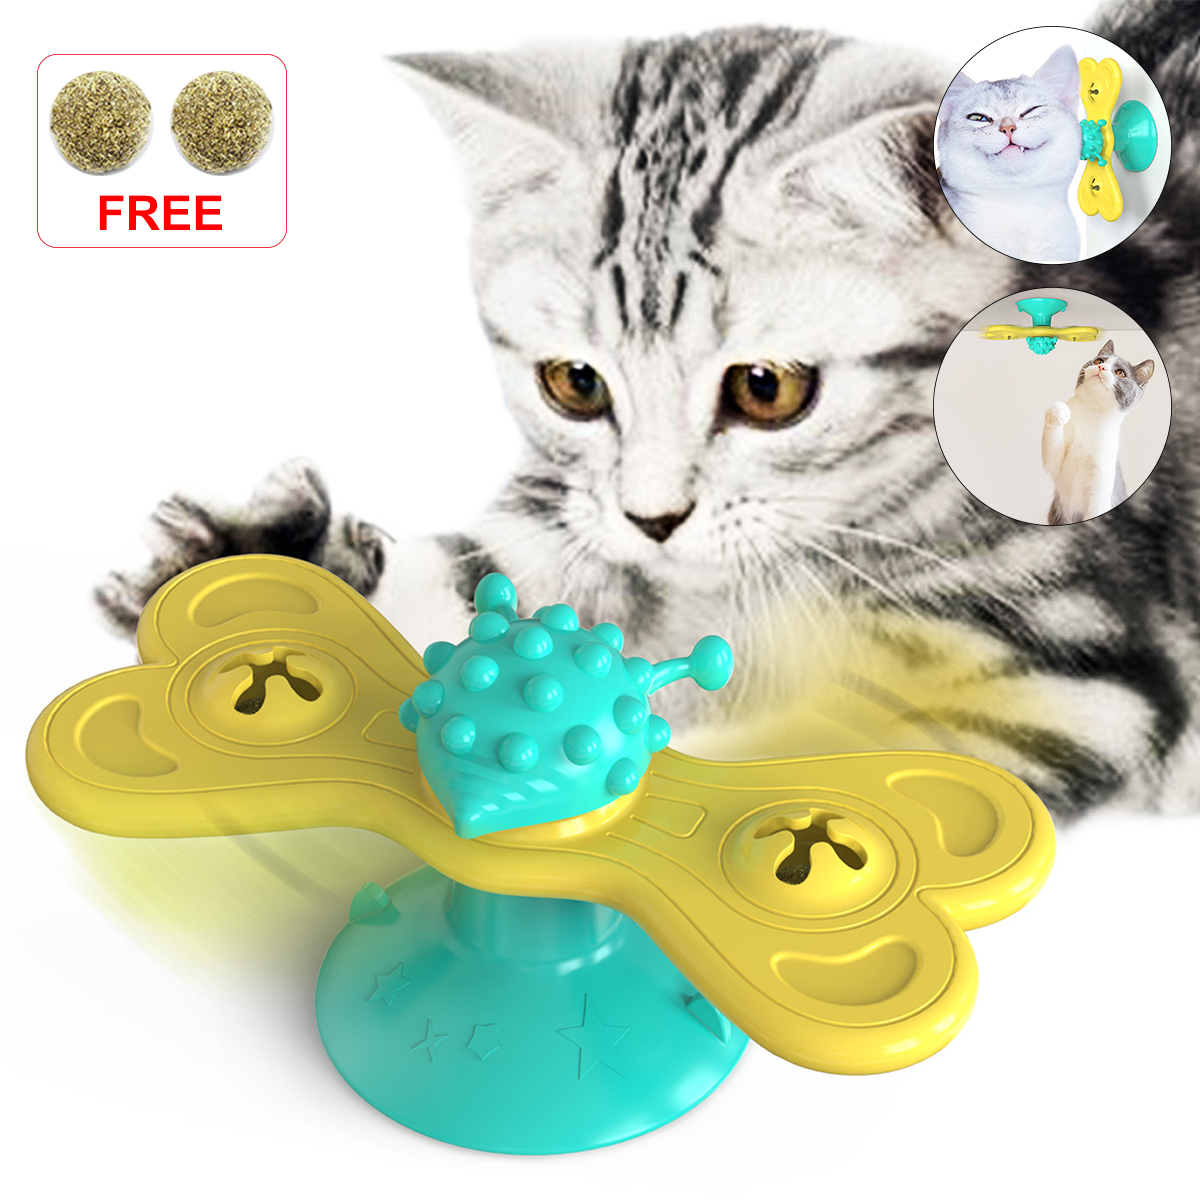 Windmill-Cat-Toy-Funny-Turntable-Teasing-Pet-Toy-Scratching-Tickle-Cats-Hair-Brush-Cat-Toys-Interact-1791497-1